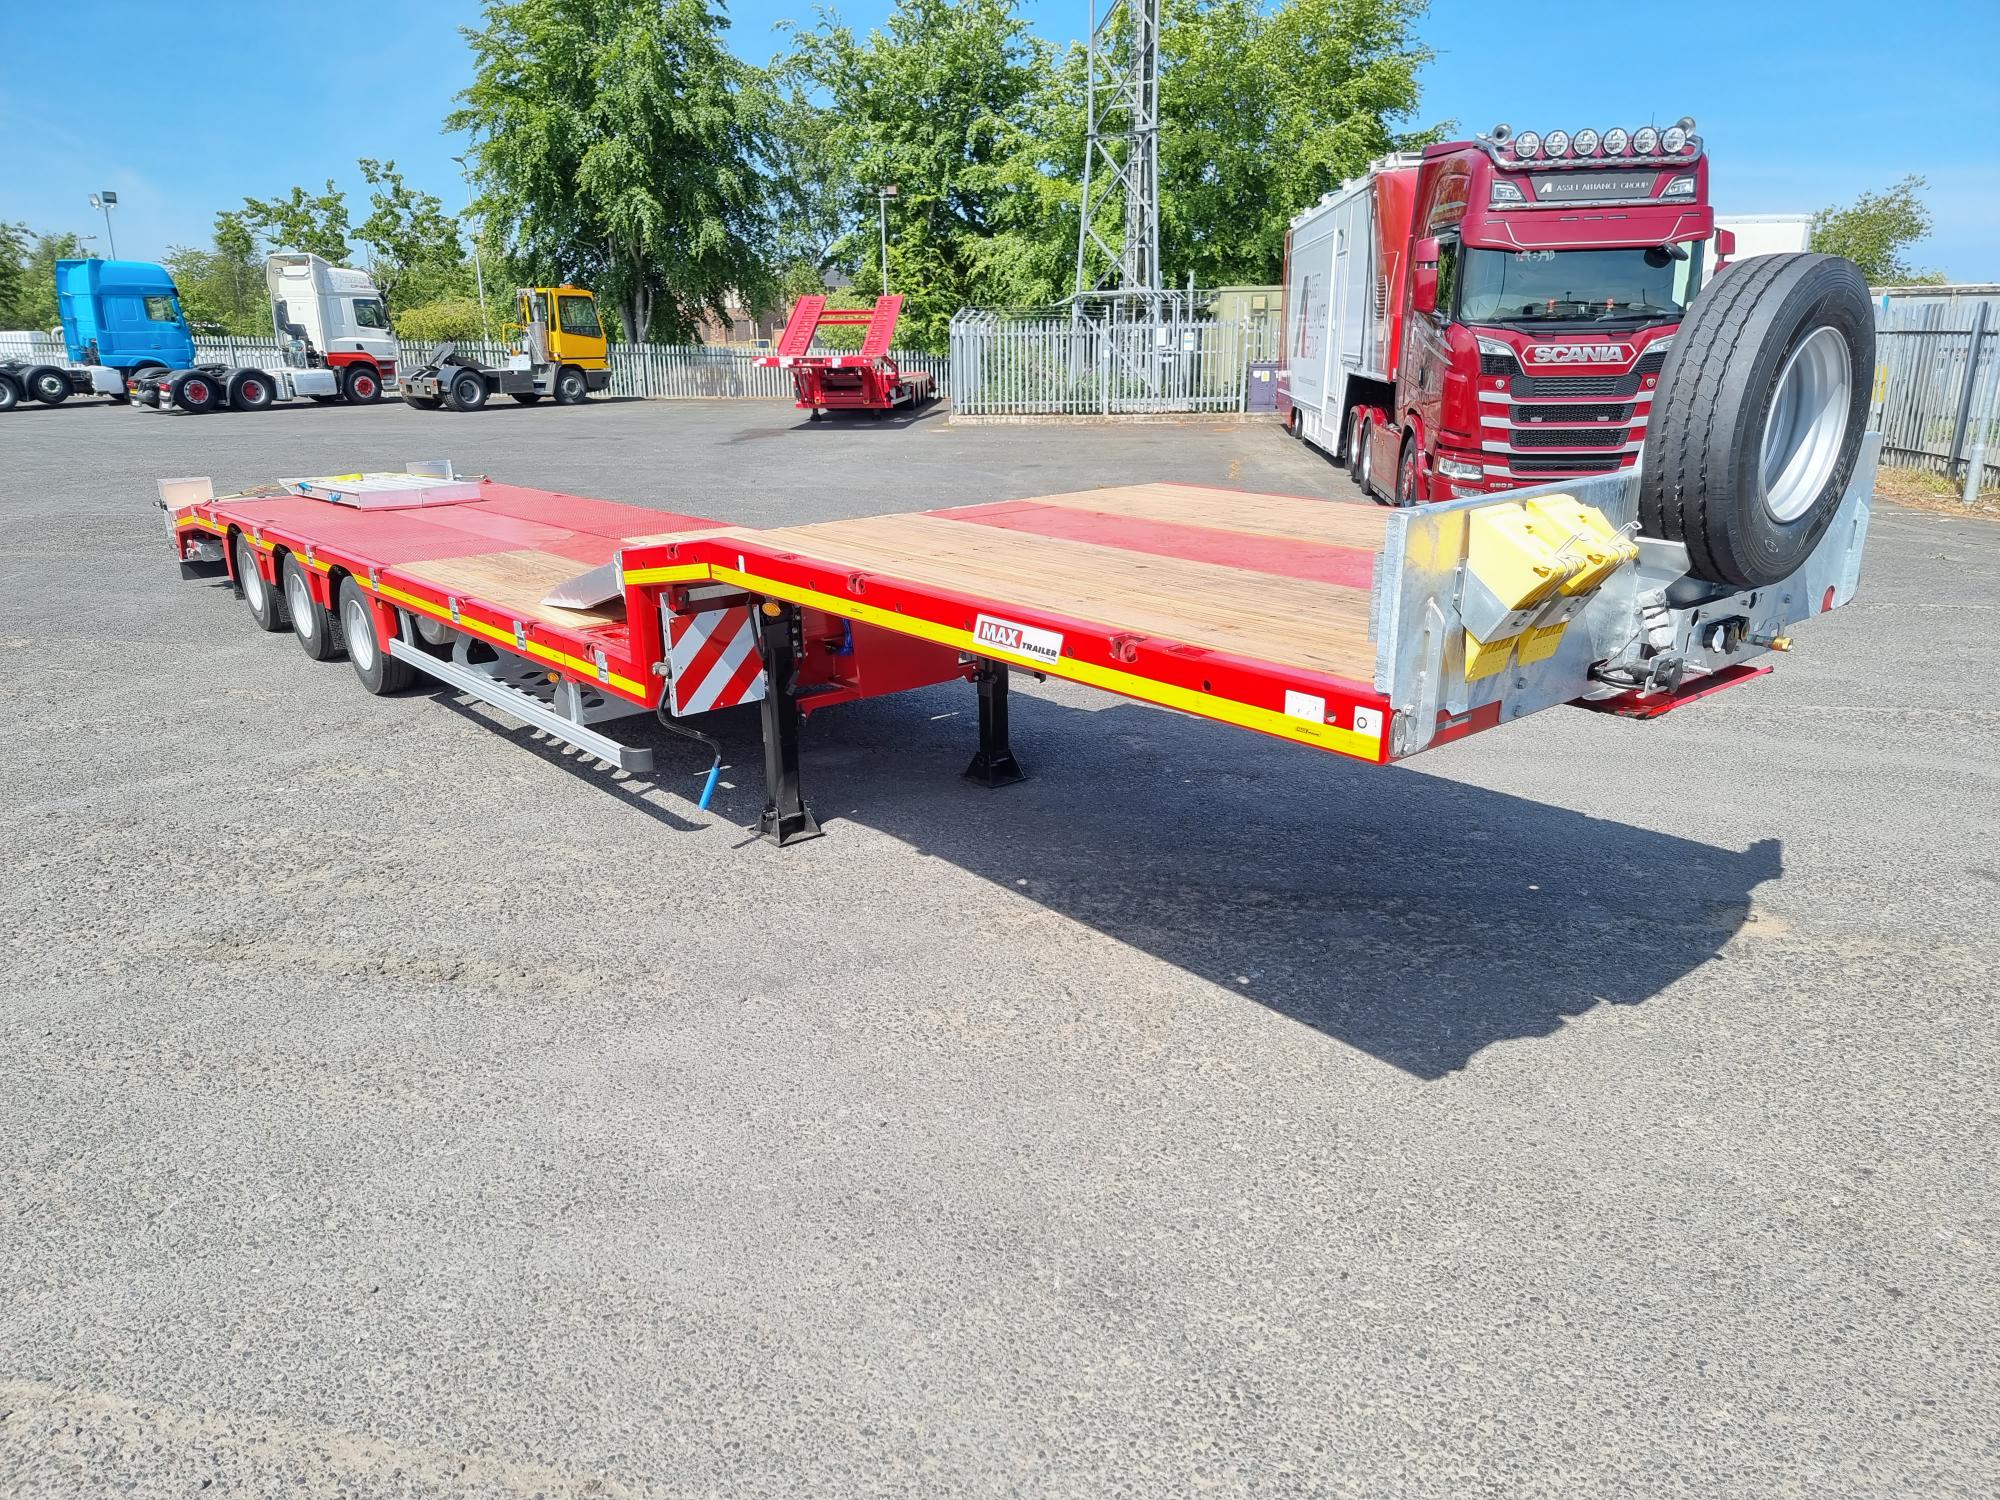 Brand New 2023 Faymonville Extendable Lowloader, BPW Axles, Drum Brakes, Steel Track with Timber Infill, 17.5 Inch Wheels, Clip on Ramps at Neck & Rear, Rear Beacons, Spare Wheel, Winch with Bluetooth Remote, Lashing Rings, Toolbox, Wheel Chocks, Rear Steer, Full Manufacturers Warranty Applies & Finance Options Available.